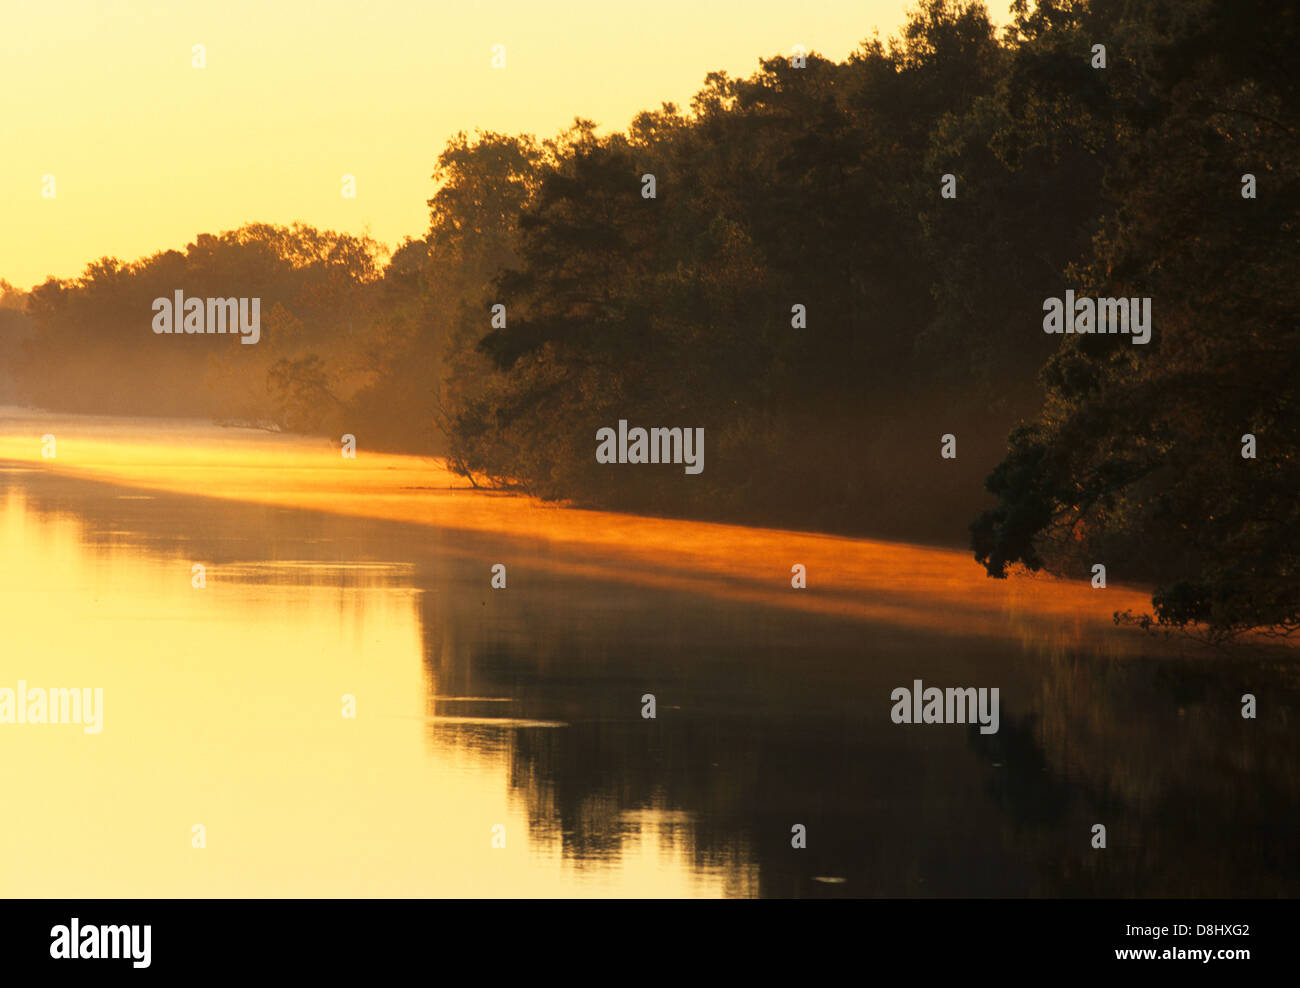 Elk283-4378 Louisiana, Cajun Country, Lake Fausse Pointe State Park, sunrise on Borrow Pit Canal Stock Photo